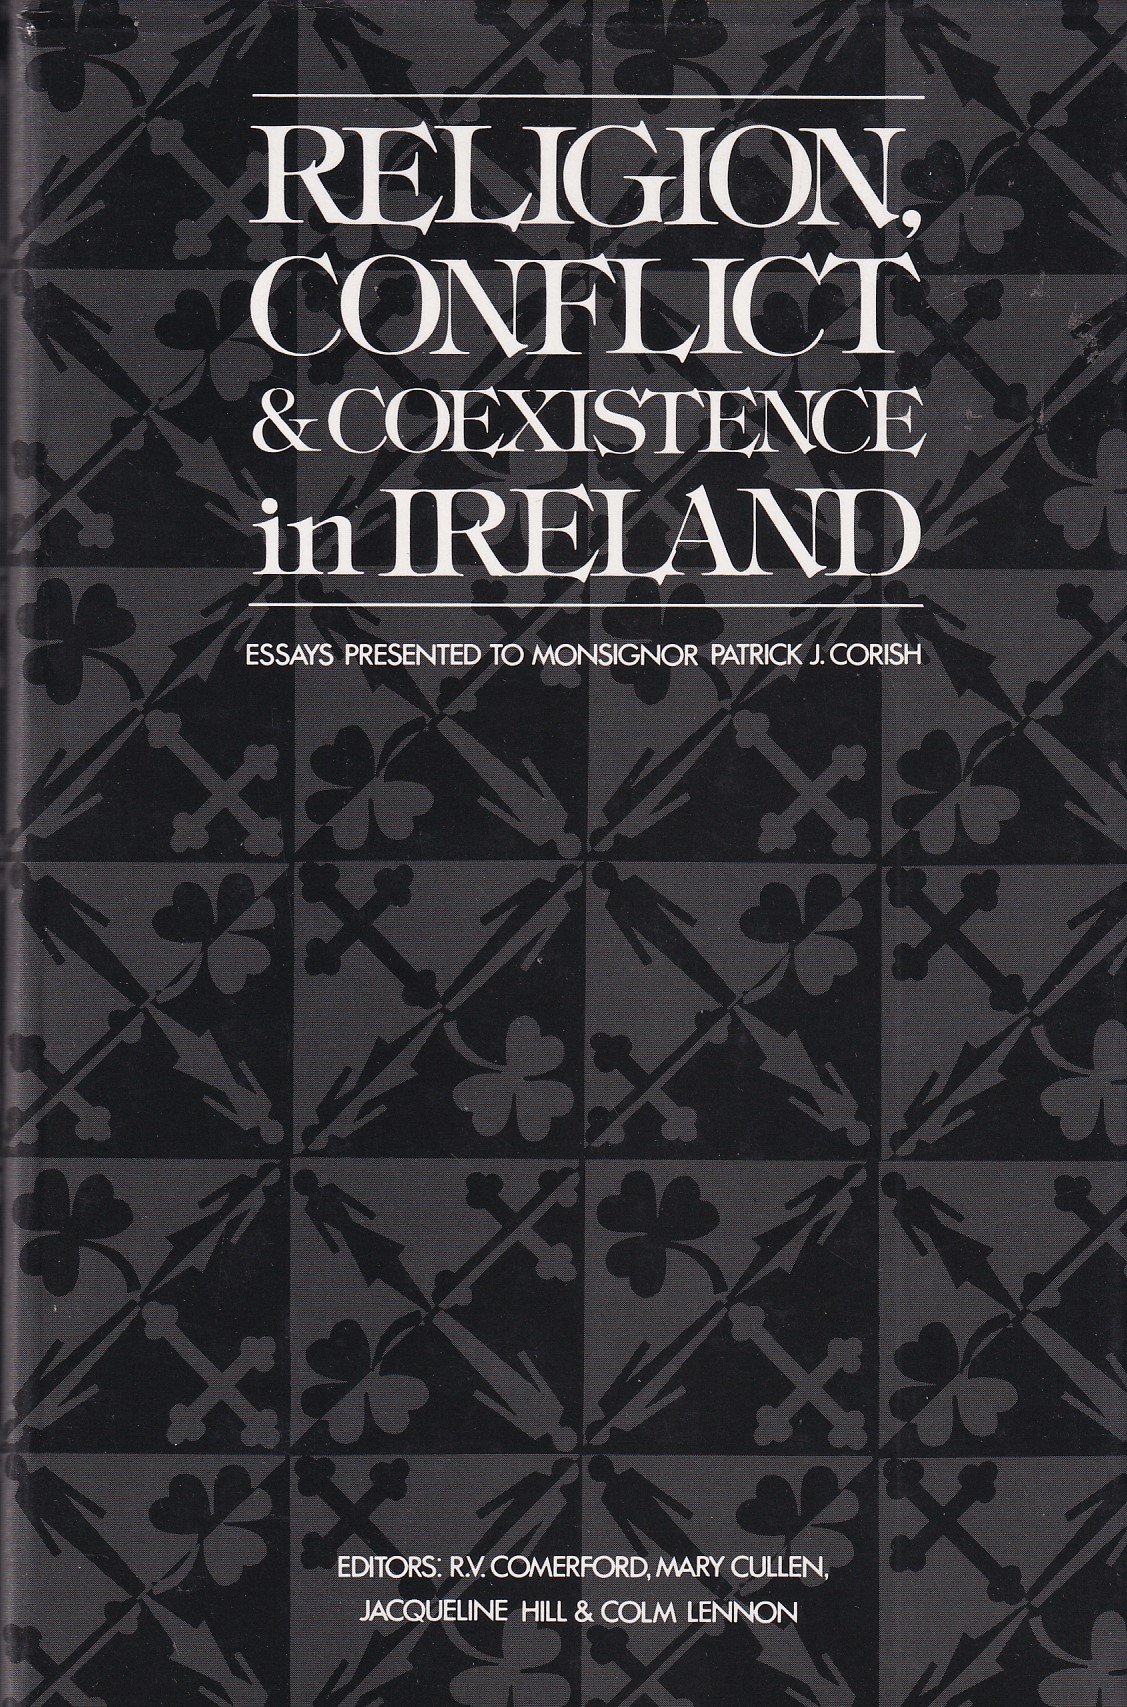 Religion, Conflict and Coexistence in Ireland: Essays Presented to Monsignor Patrick J. Corish | Comerford, RV et al (eds) | Charlie Byrne's